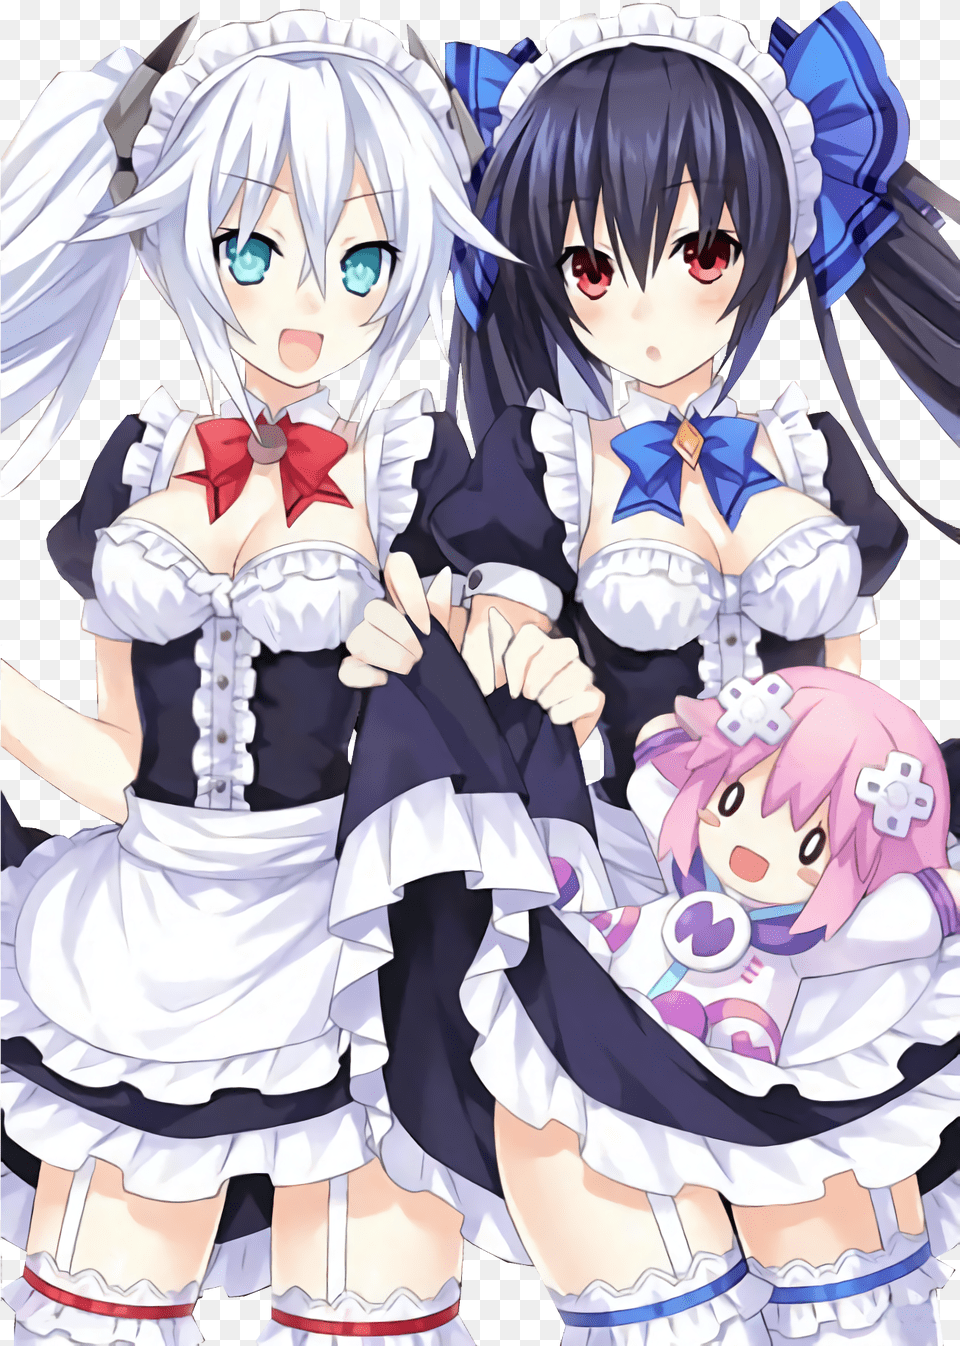 Black Heart And Noire Render Redraw By Jessymoonn Darxhbw Noire And Black Heart, Book, Comics, Publication, Baby Png